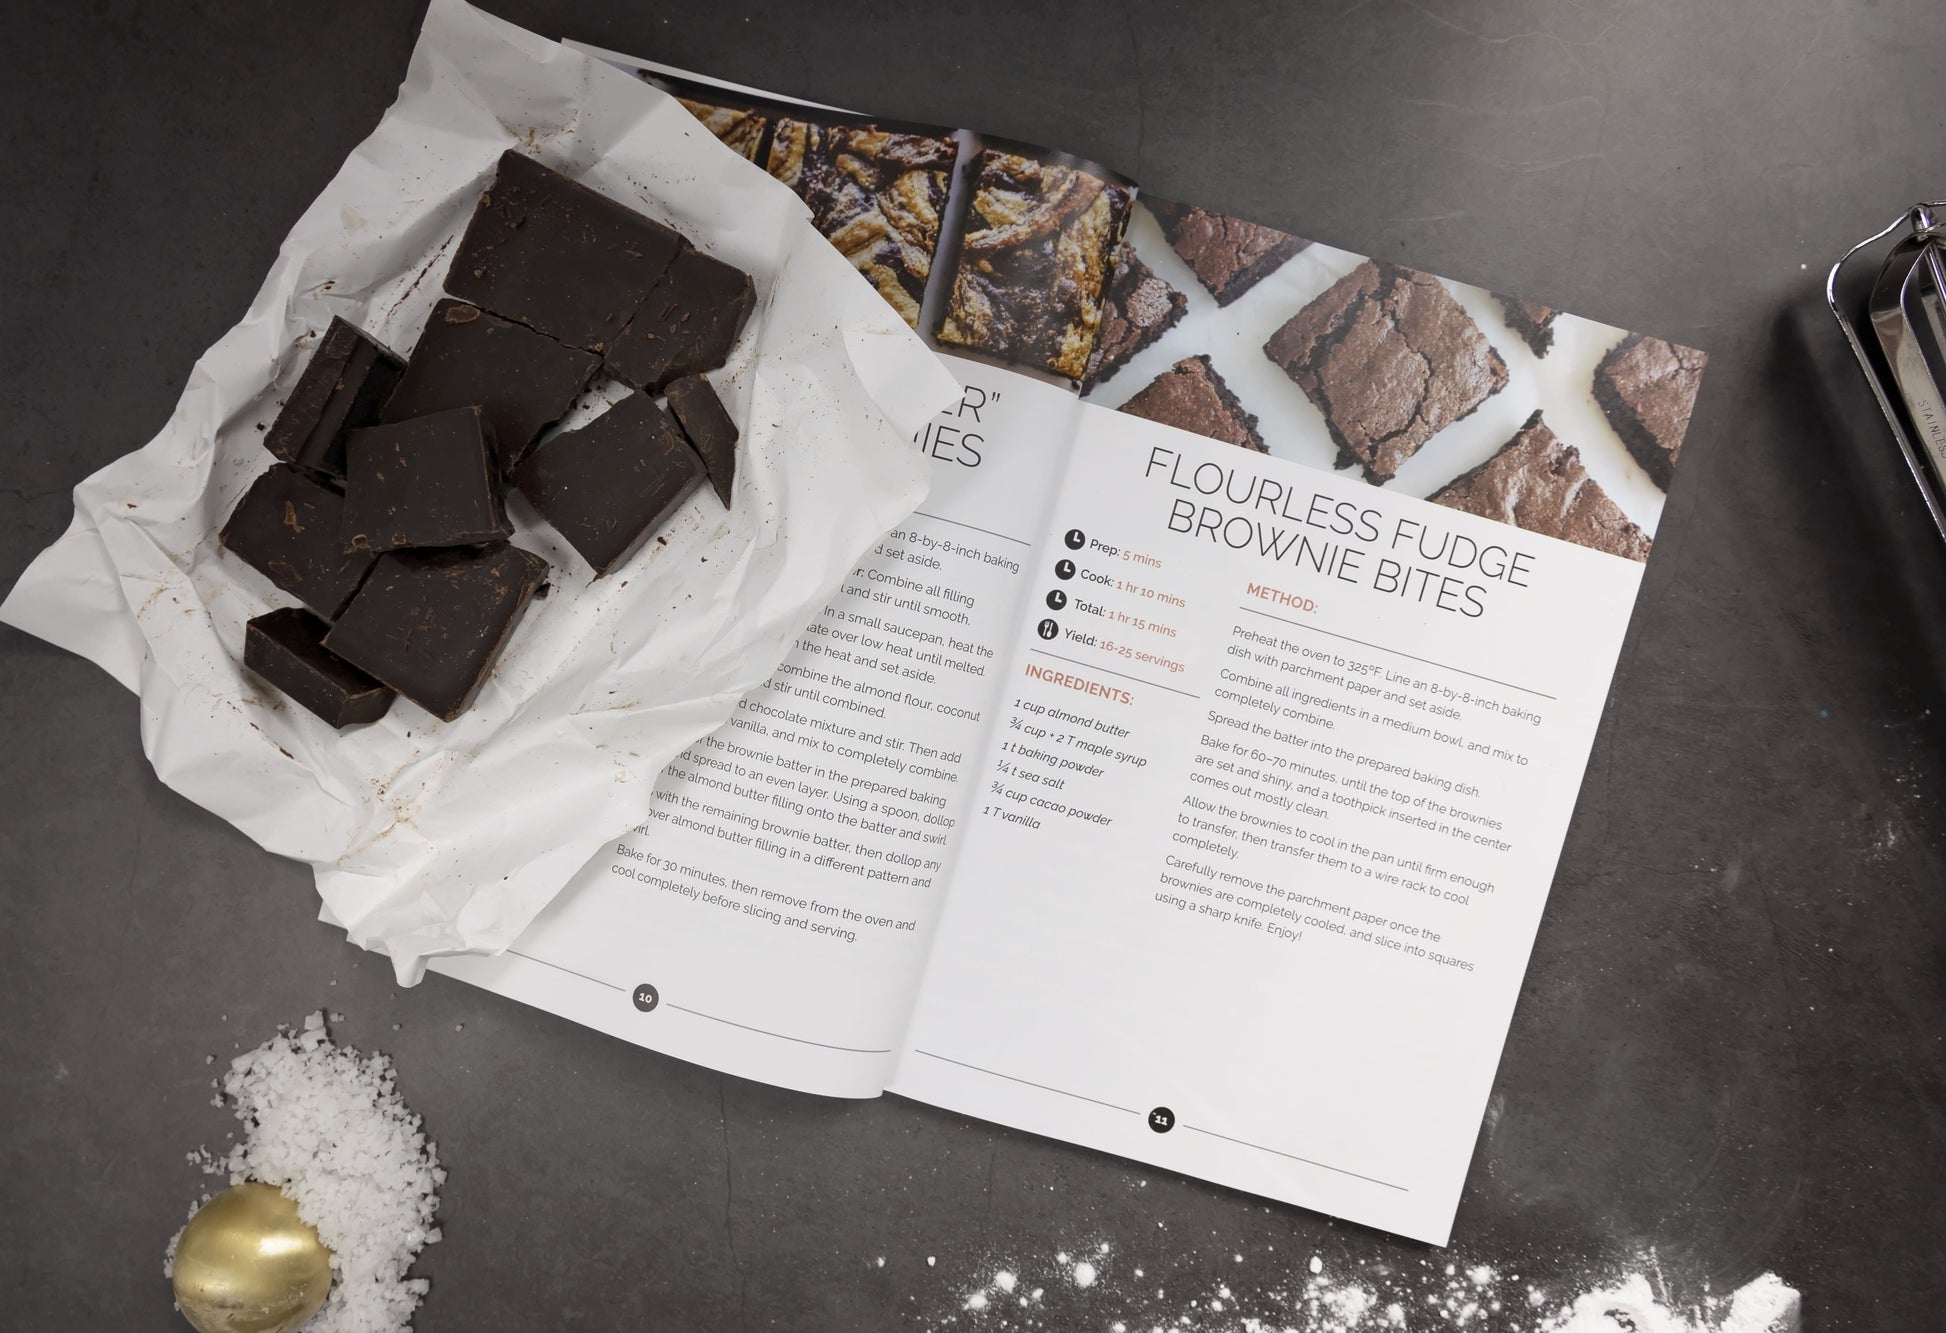 An open Paleo Sweets Cookbook with chocolate bars placed on a white paper on the left-hand pages. A measuring spoon is also visible on the left side.